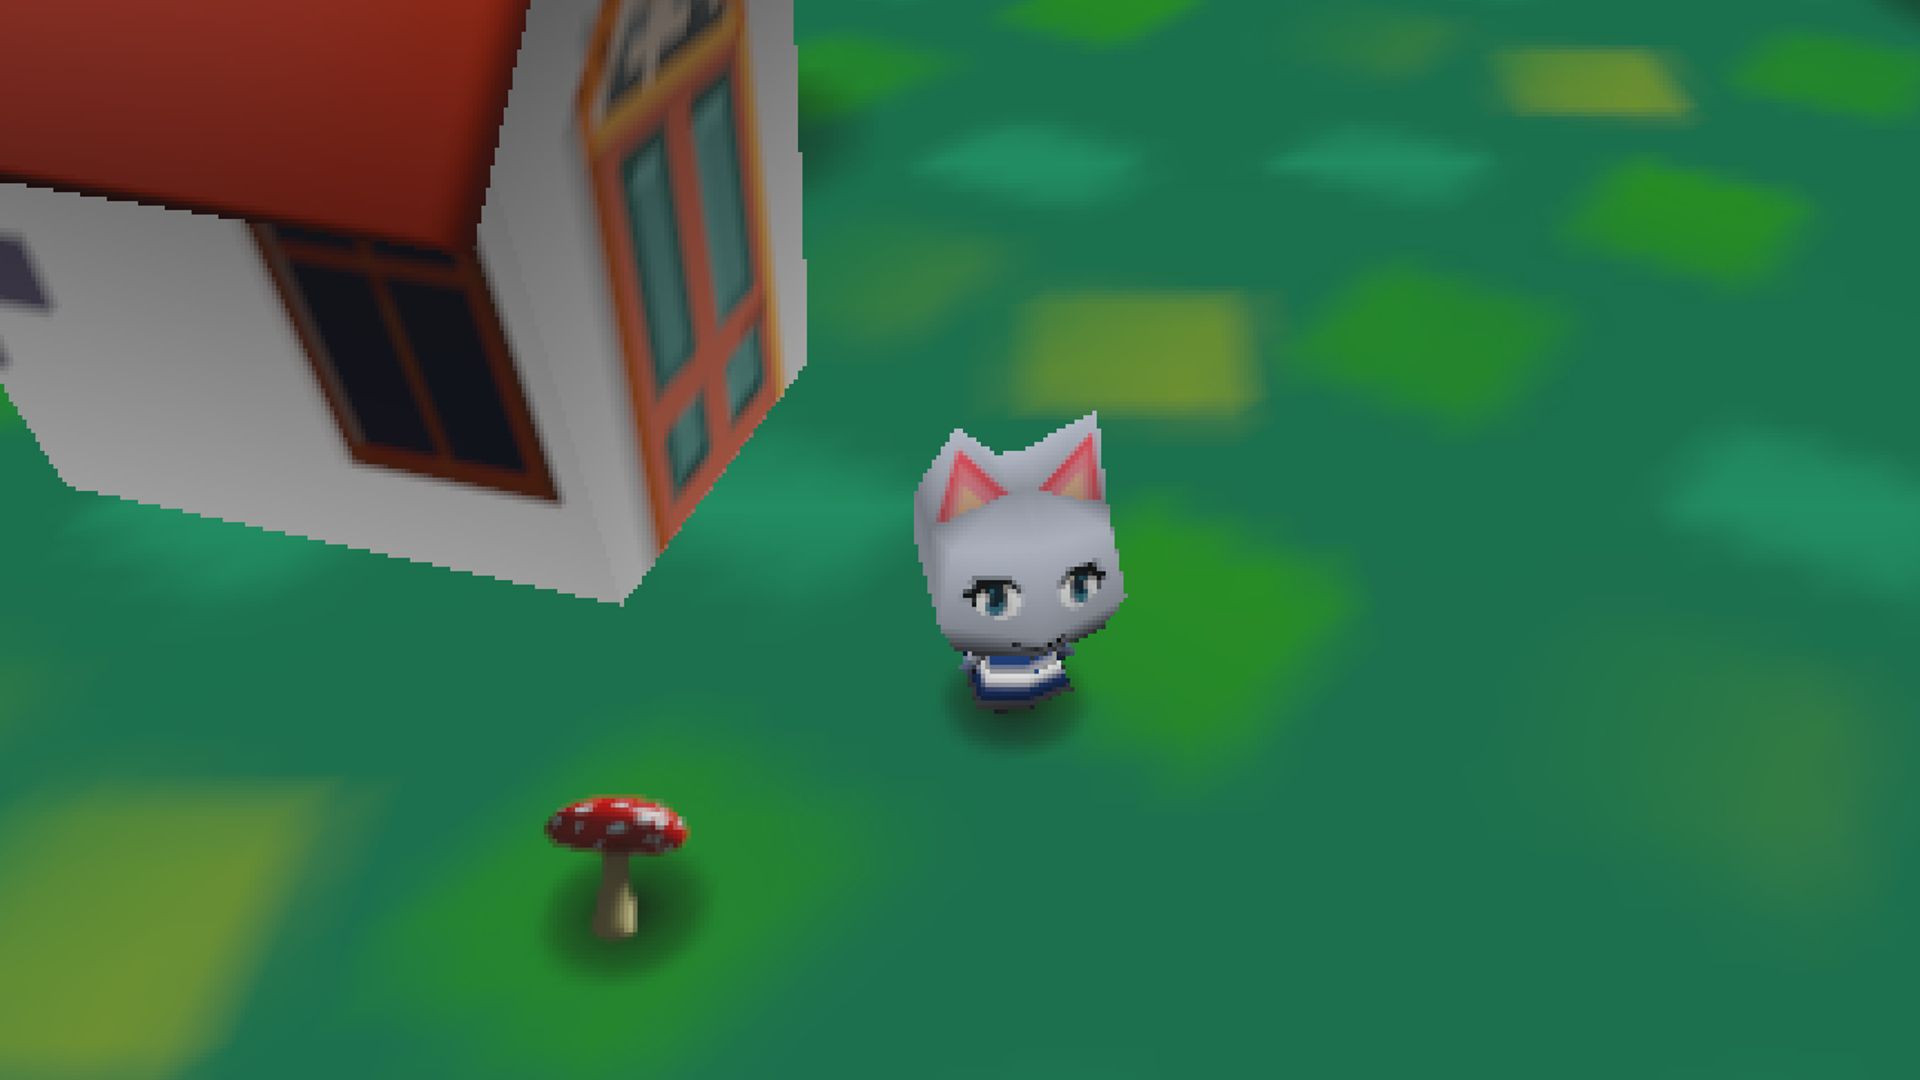  This Animal Crossing creepypasta game is perfect for Friday the 13th 